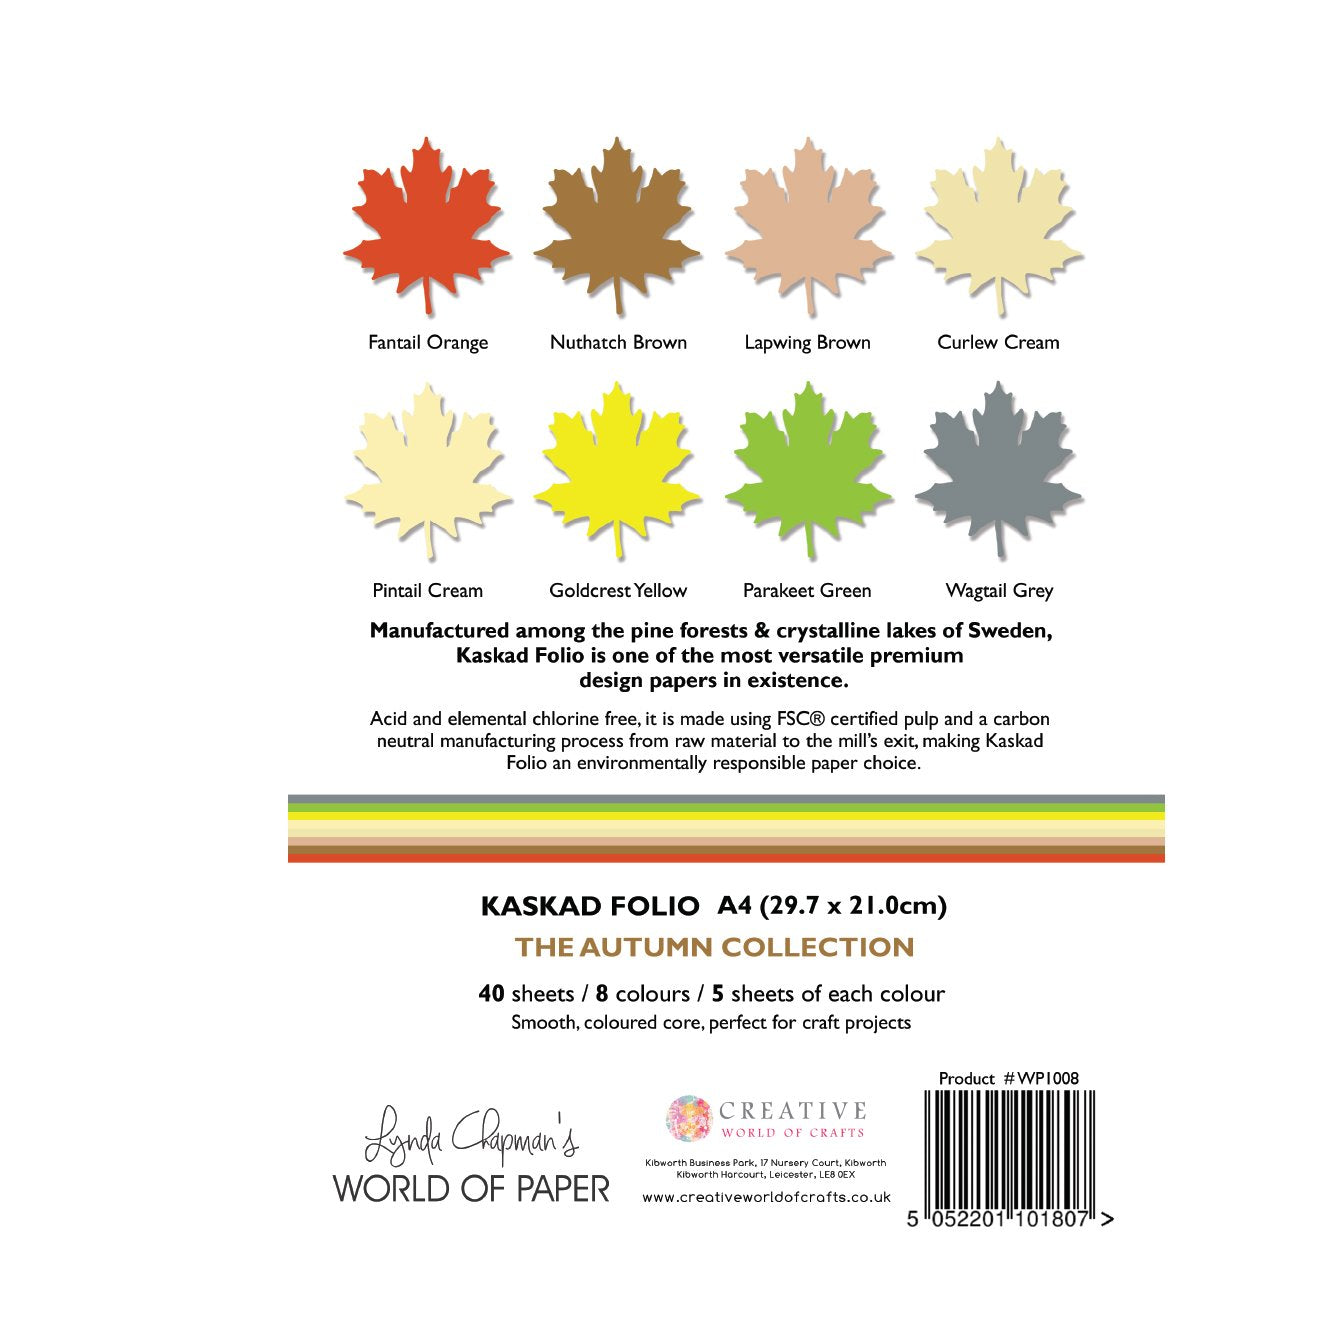 Kaskad Folio Autumn Collection A4 225gsm Coloured Core Cardstock 40 sheets